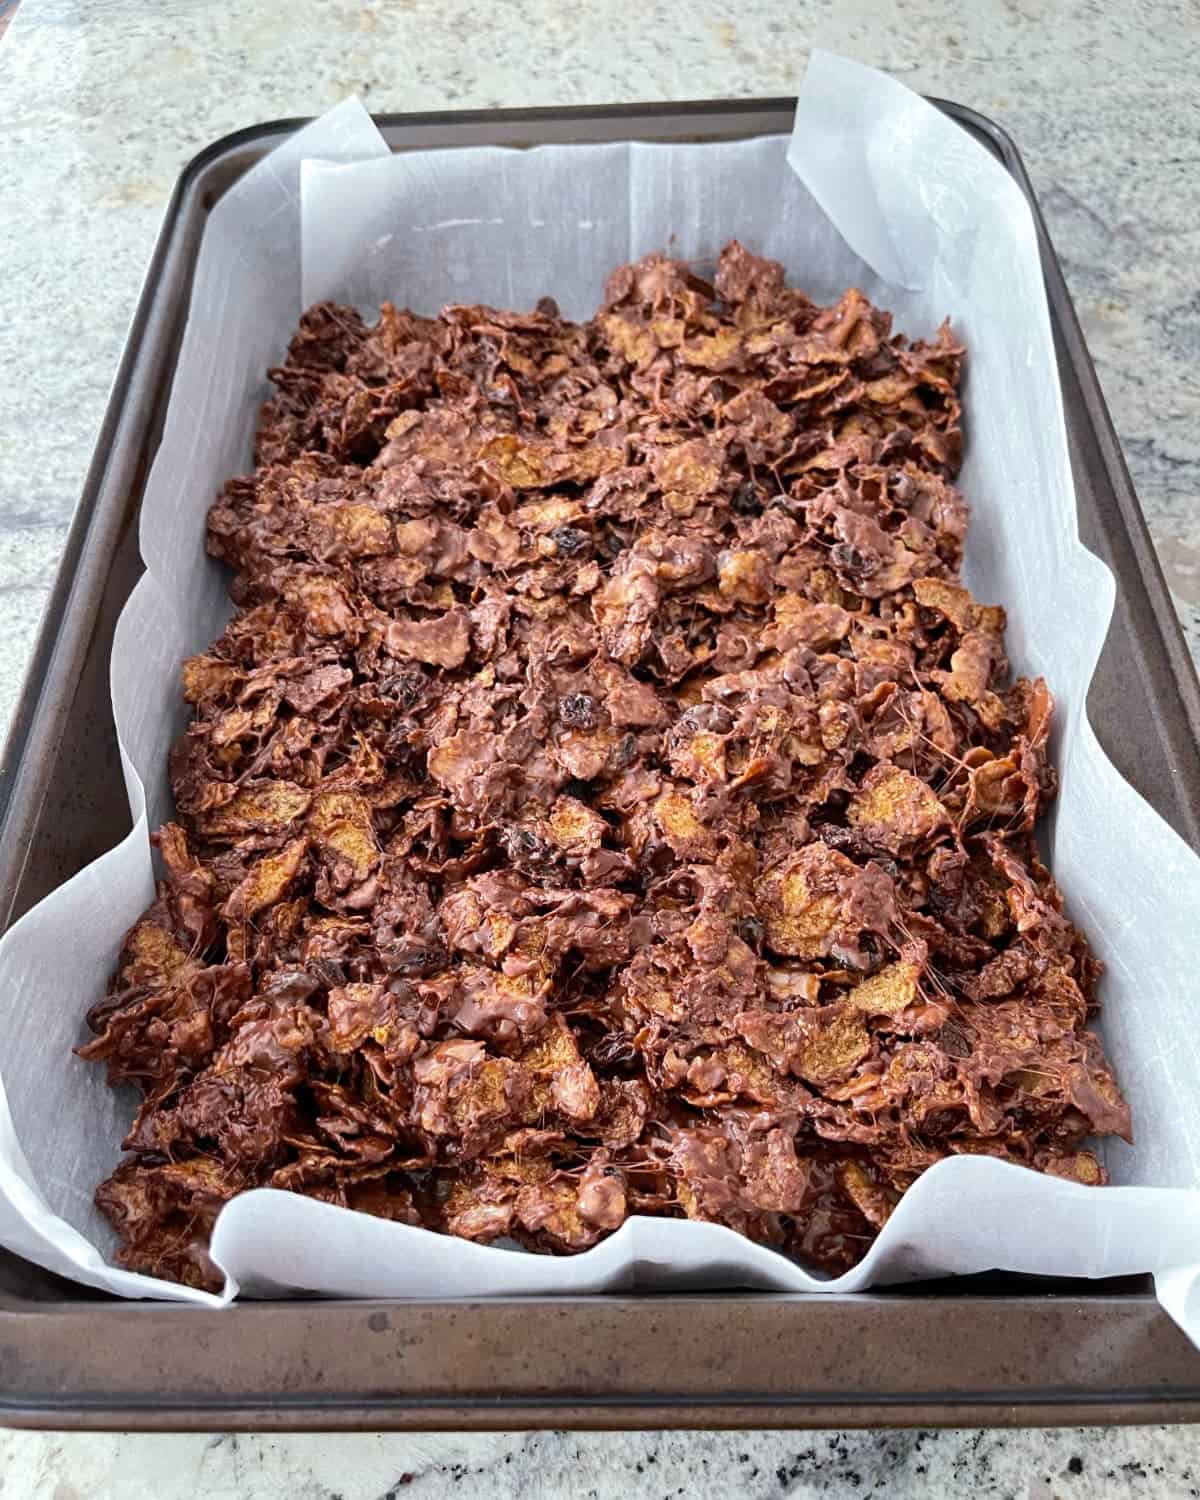 Chocolate Raisin Bran cereal bars in parchment lined baking pan.